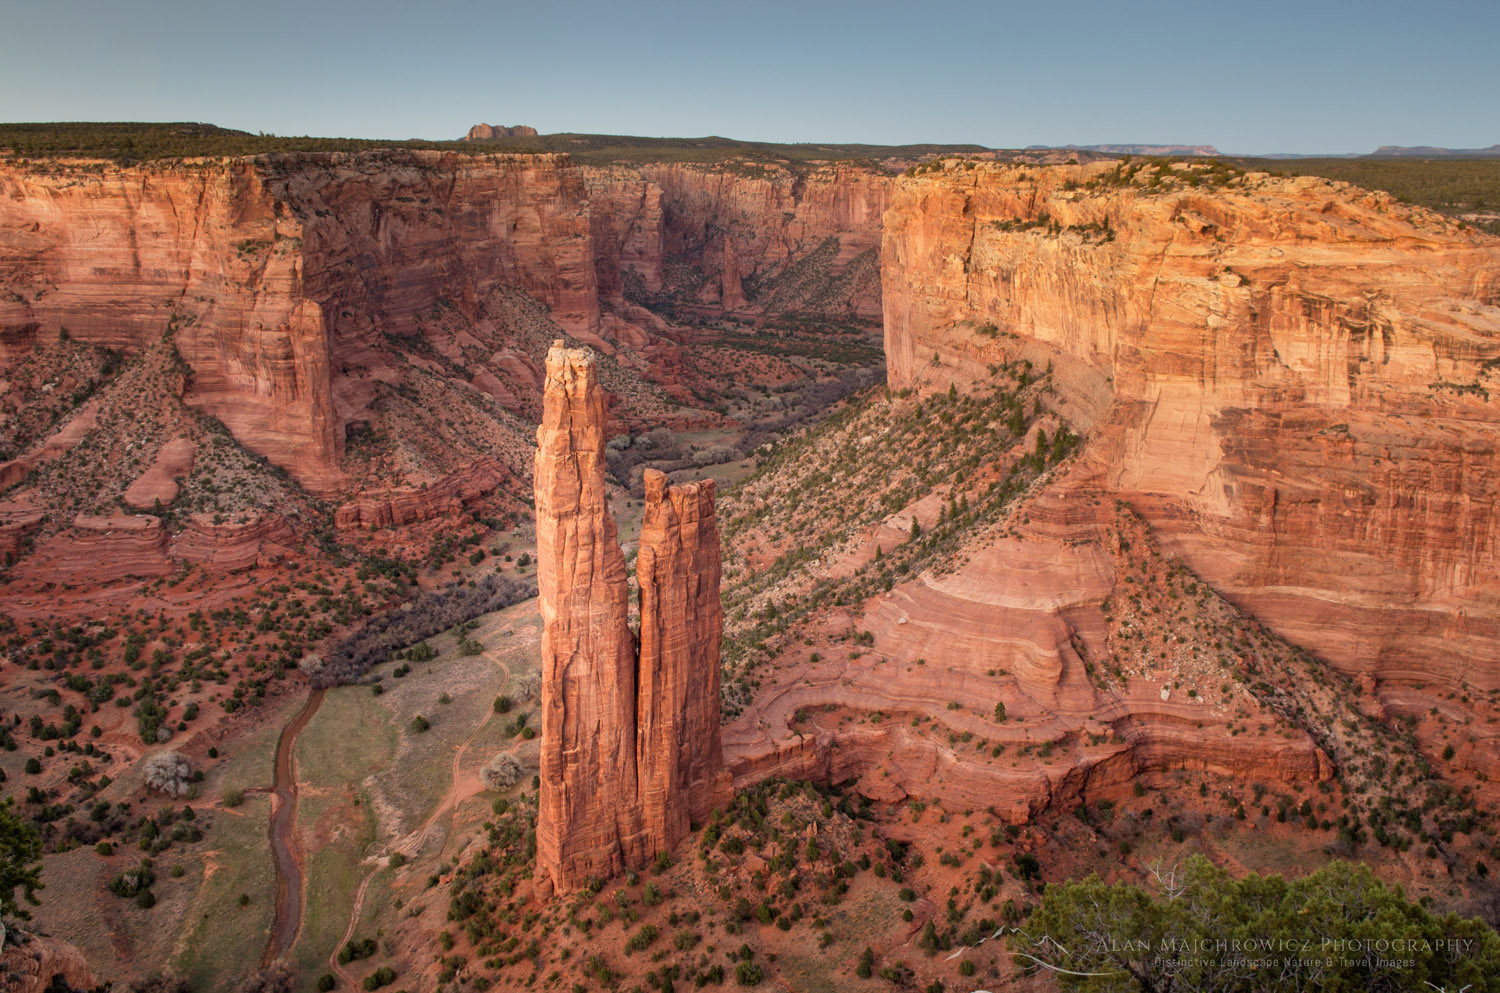 Spider Rock, Canyon de Chelly National Monument, Arizona #57539